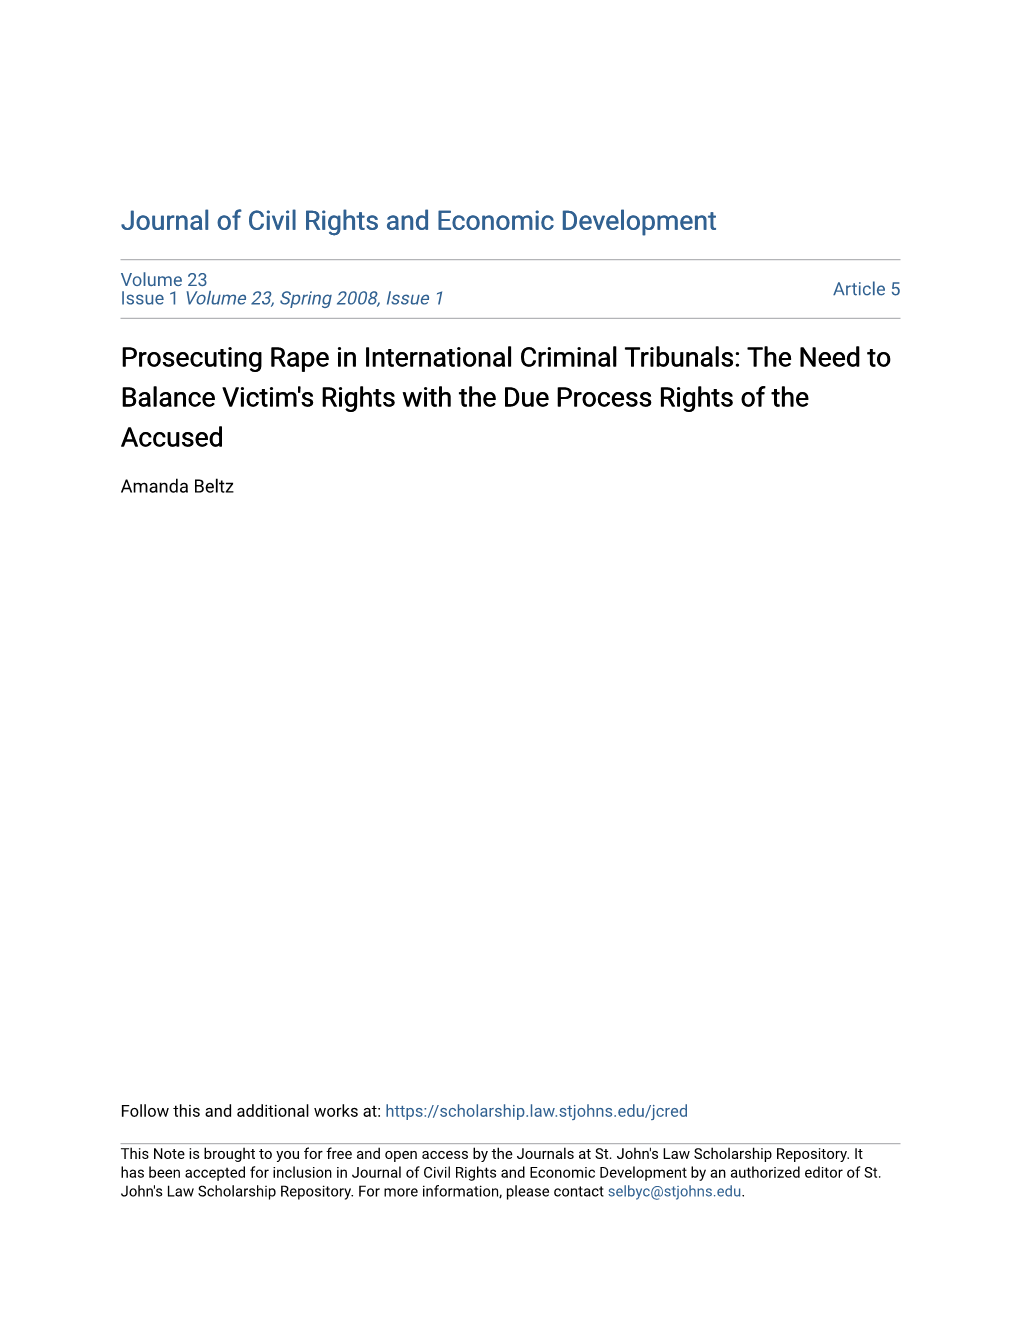 Prosecuting Rape in International Criminal Tribunals: the Need to Balance Victim's Rights with the Due Process Rights of the Accused